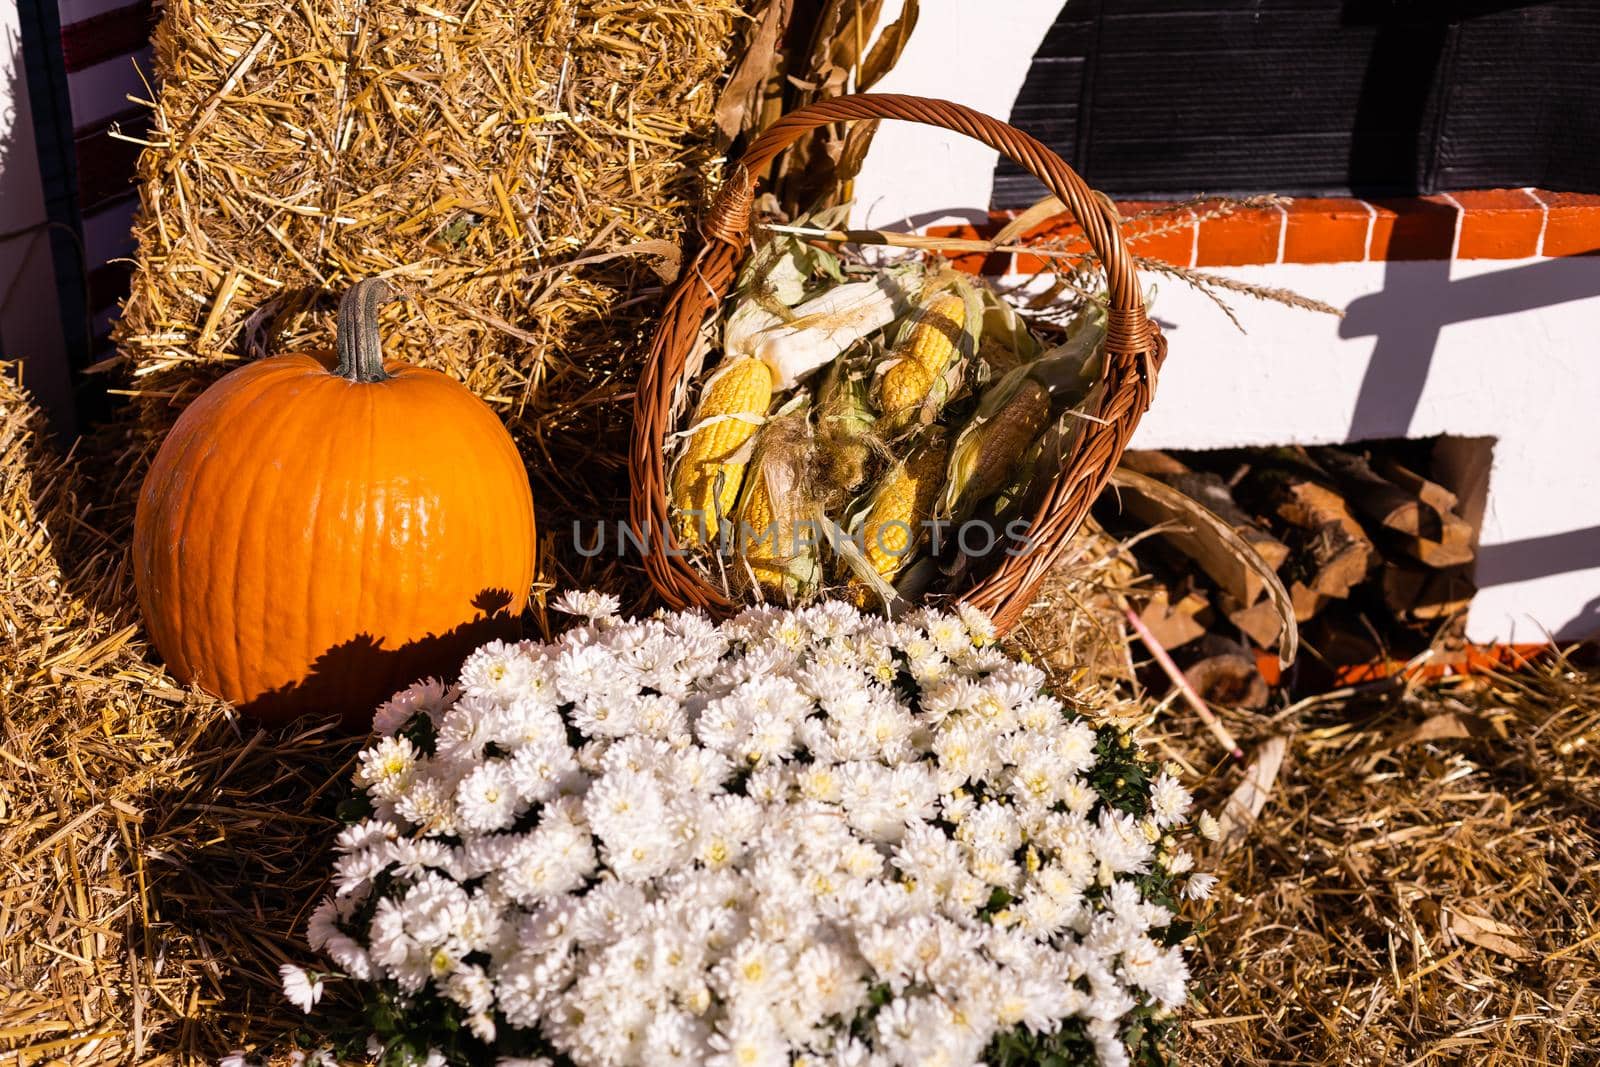 Yellow and orange pumpkins at the fair. Pumpkins in baskets and boxes. Many different pumpkins for sale. Concept of autumn, harvest and celebration by Andelov13